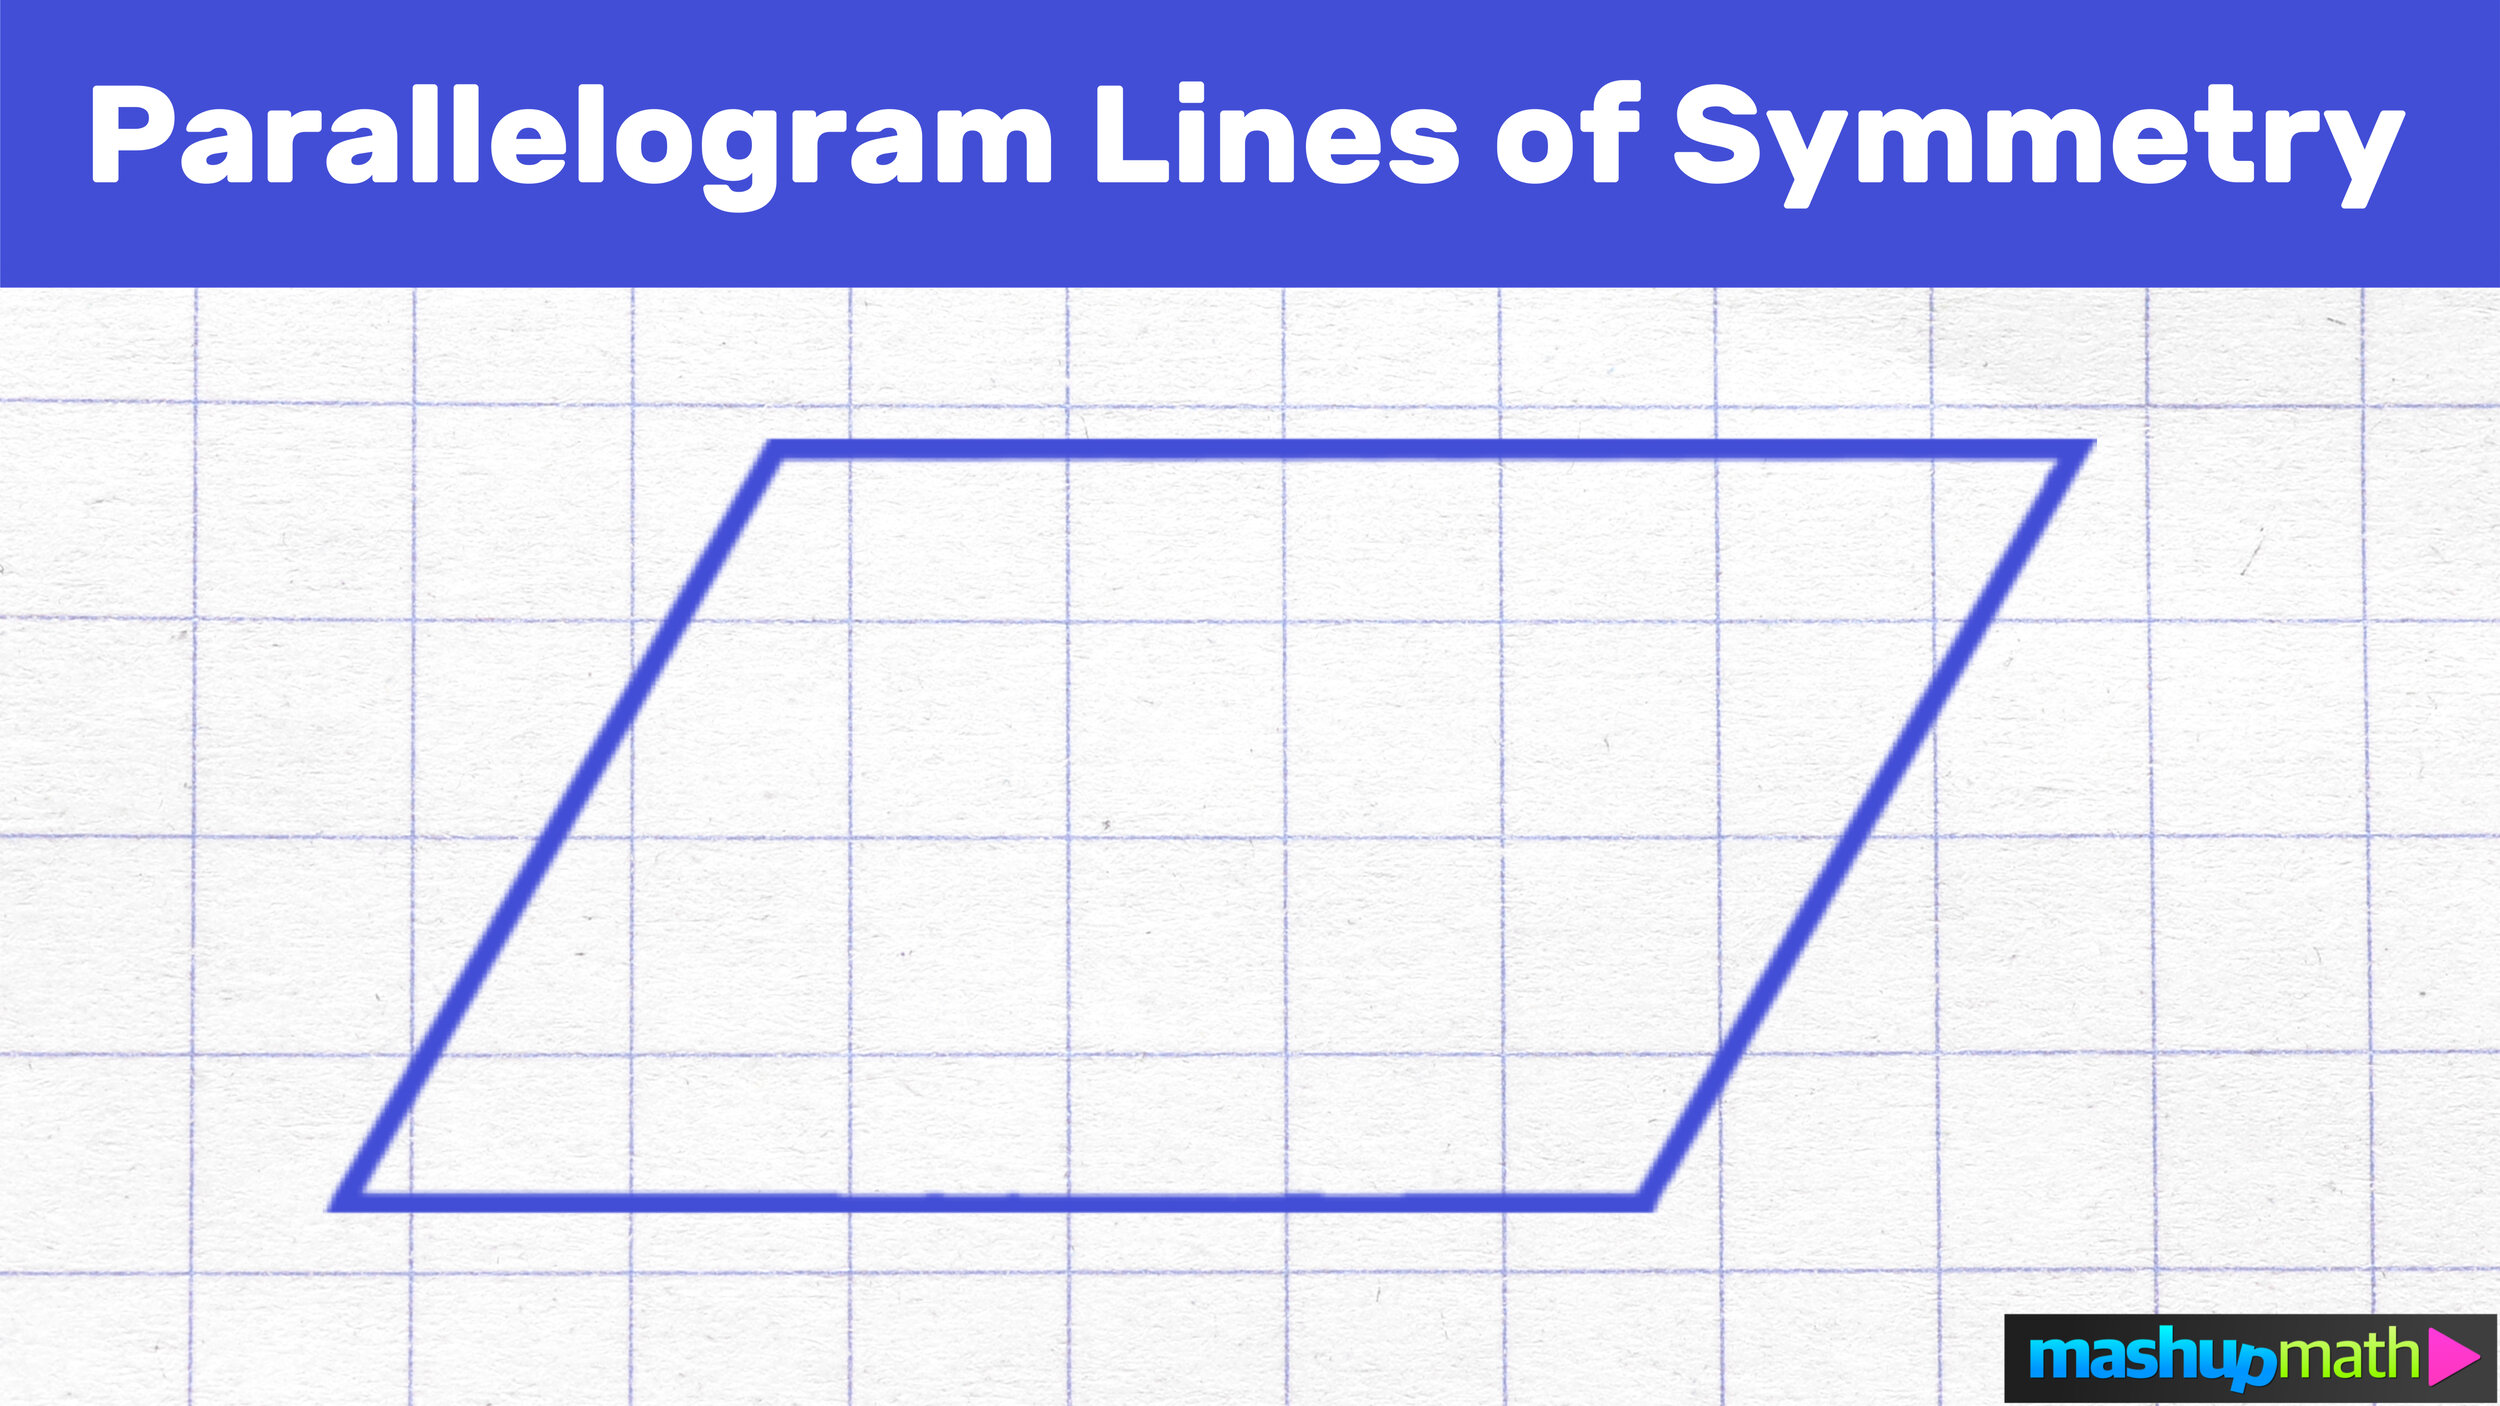 parallelogram-lines-of-symmetry-explained-mashup-math